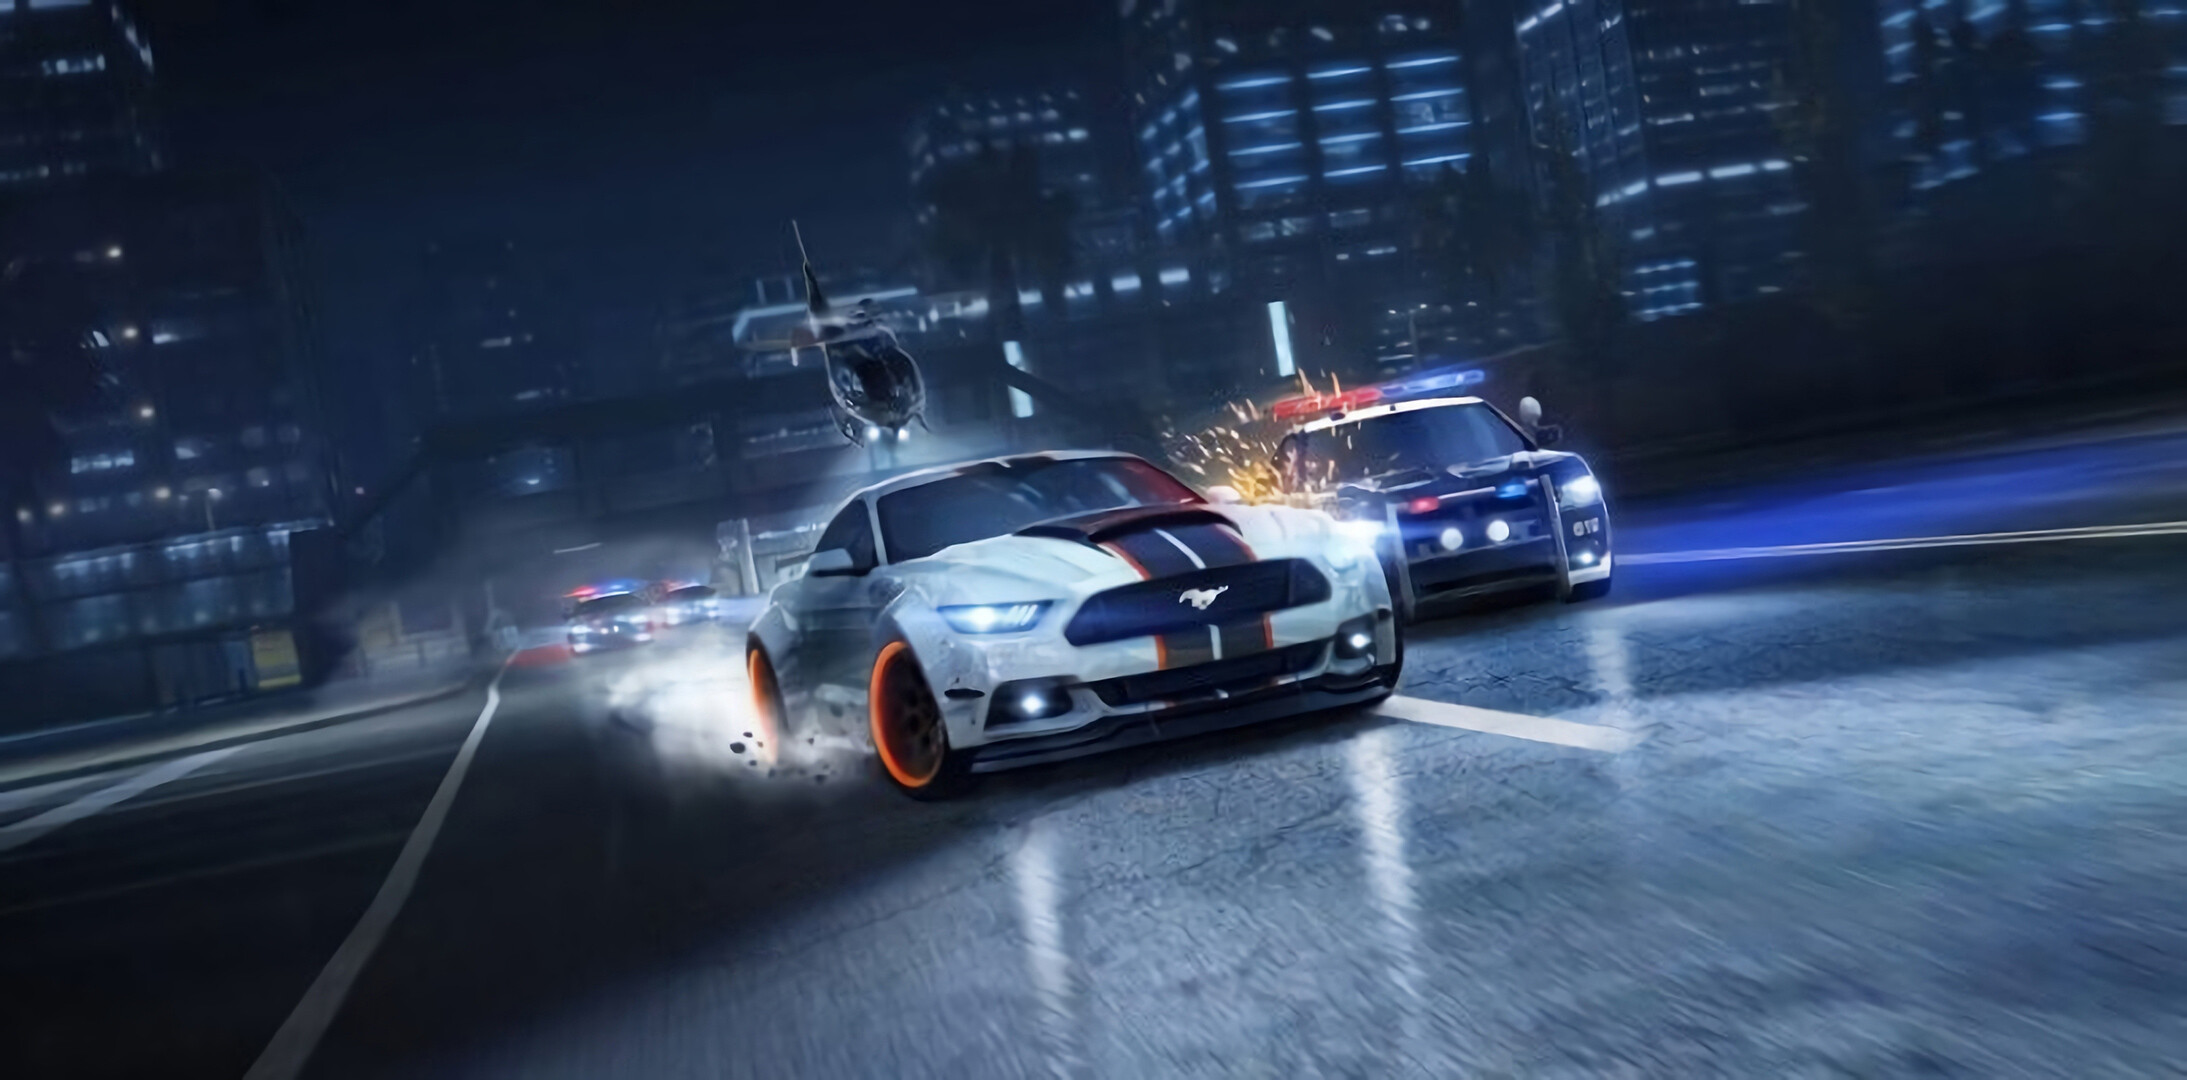 Need for Speed: A computer racing game that is published by Electronic Arts. 2190x1080 Dual Screen Wallpaper.